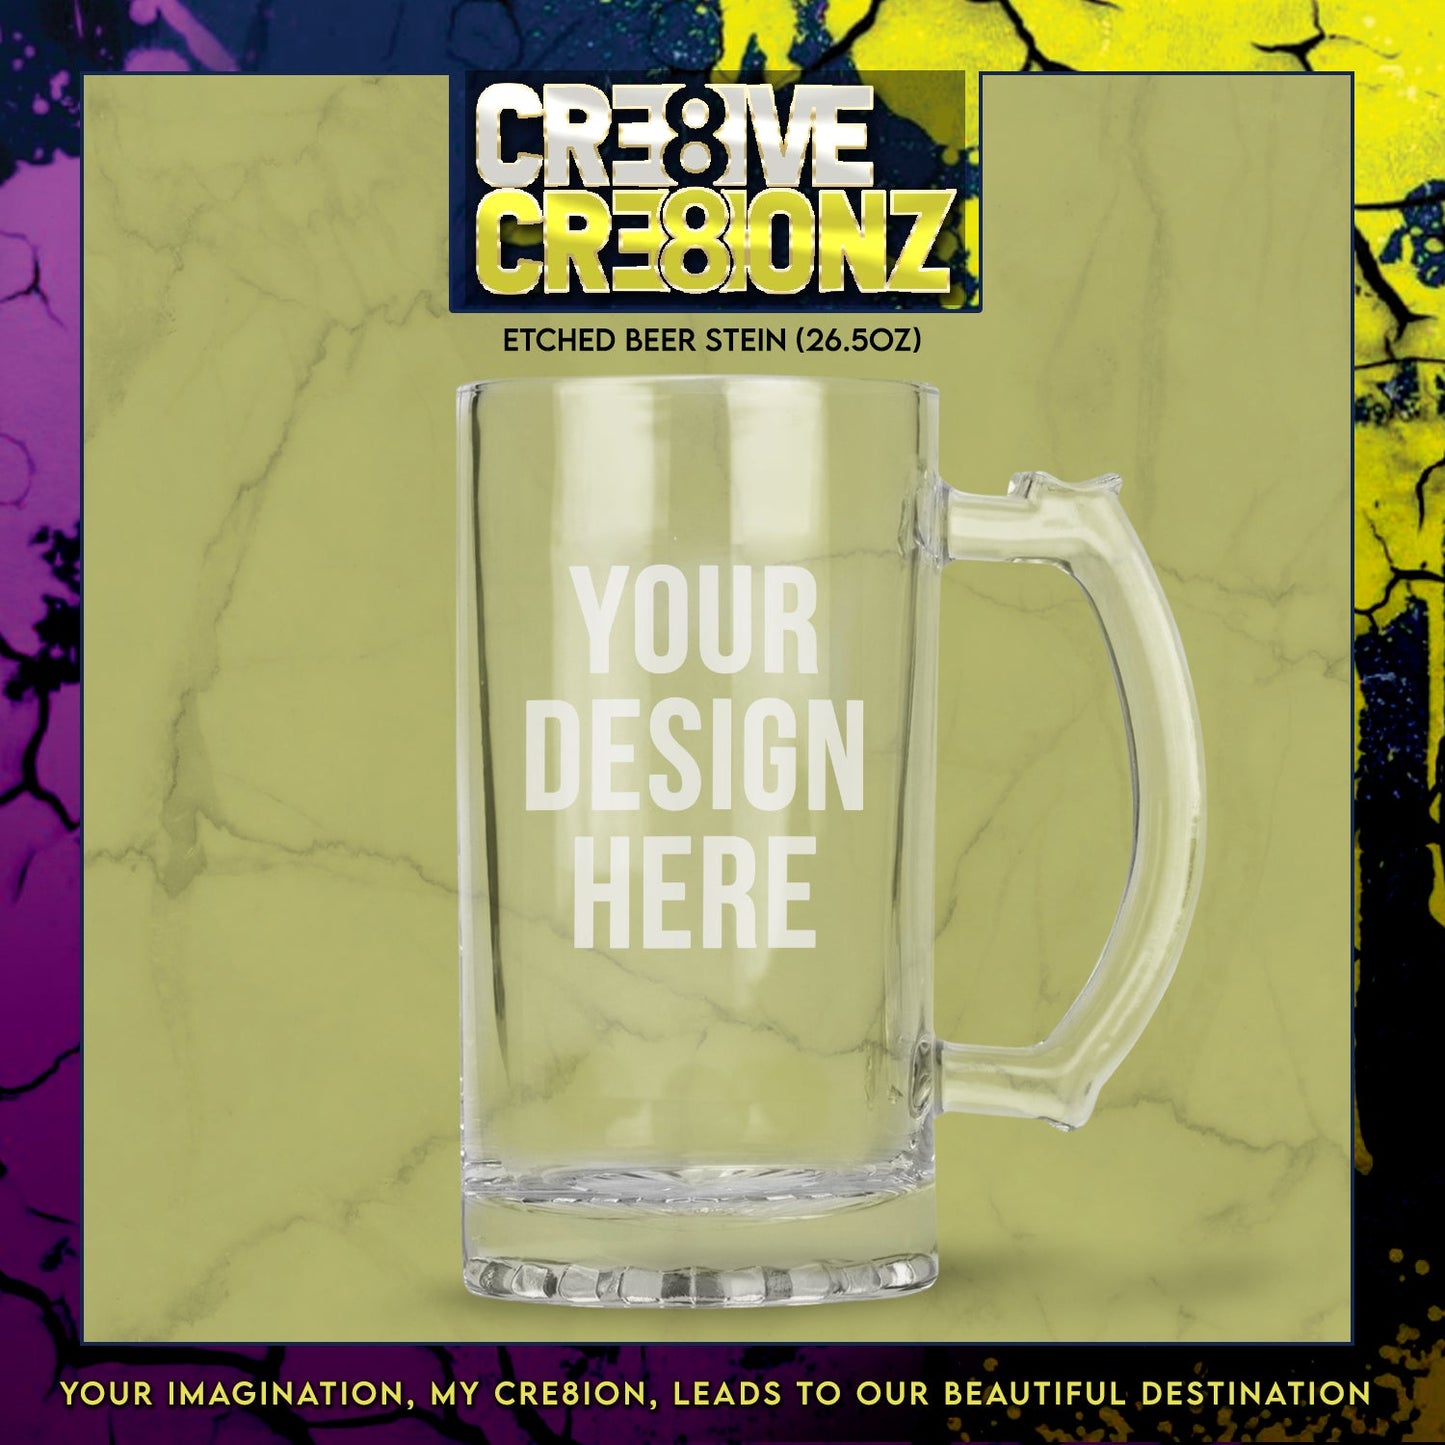 Custom Etch Beer Steins - Cre8ive Cre8ionz